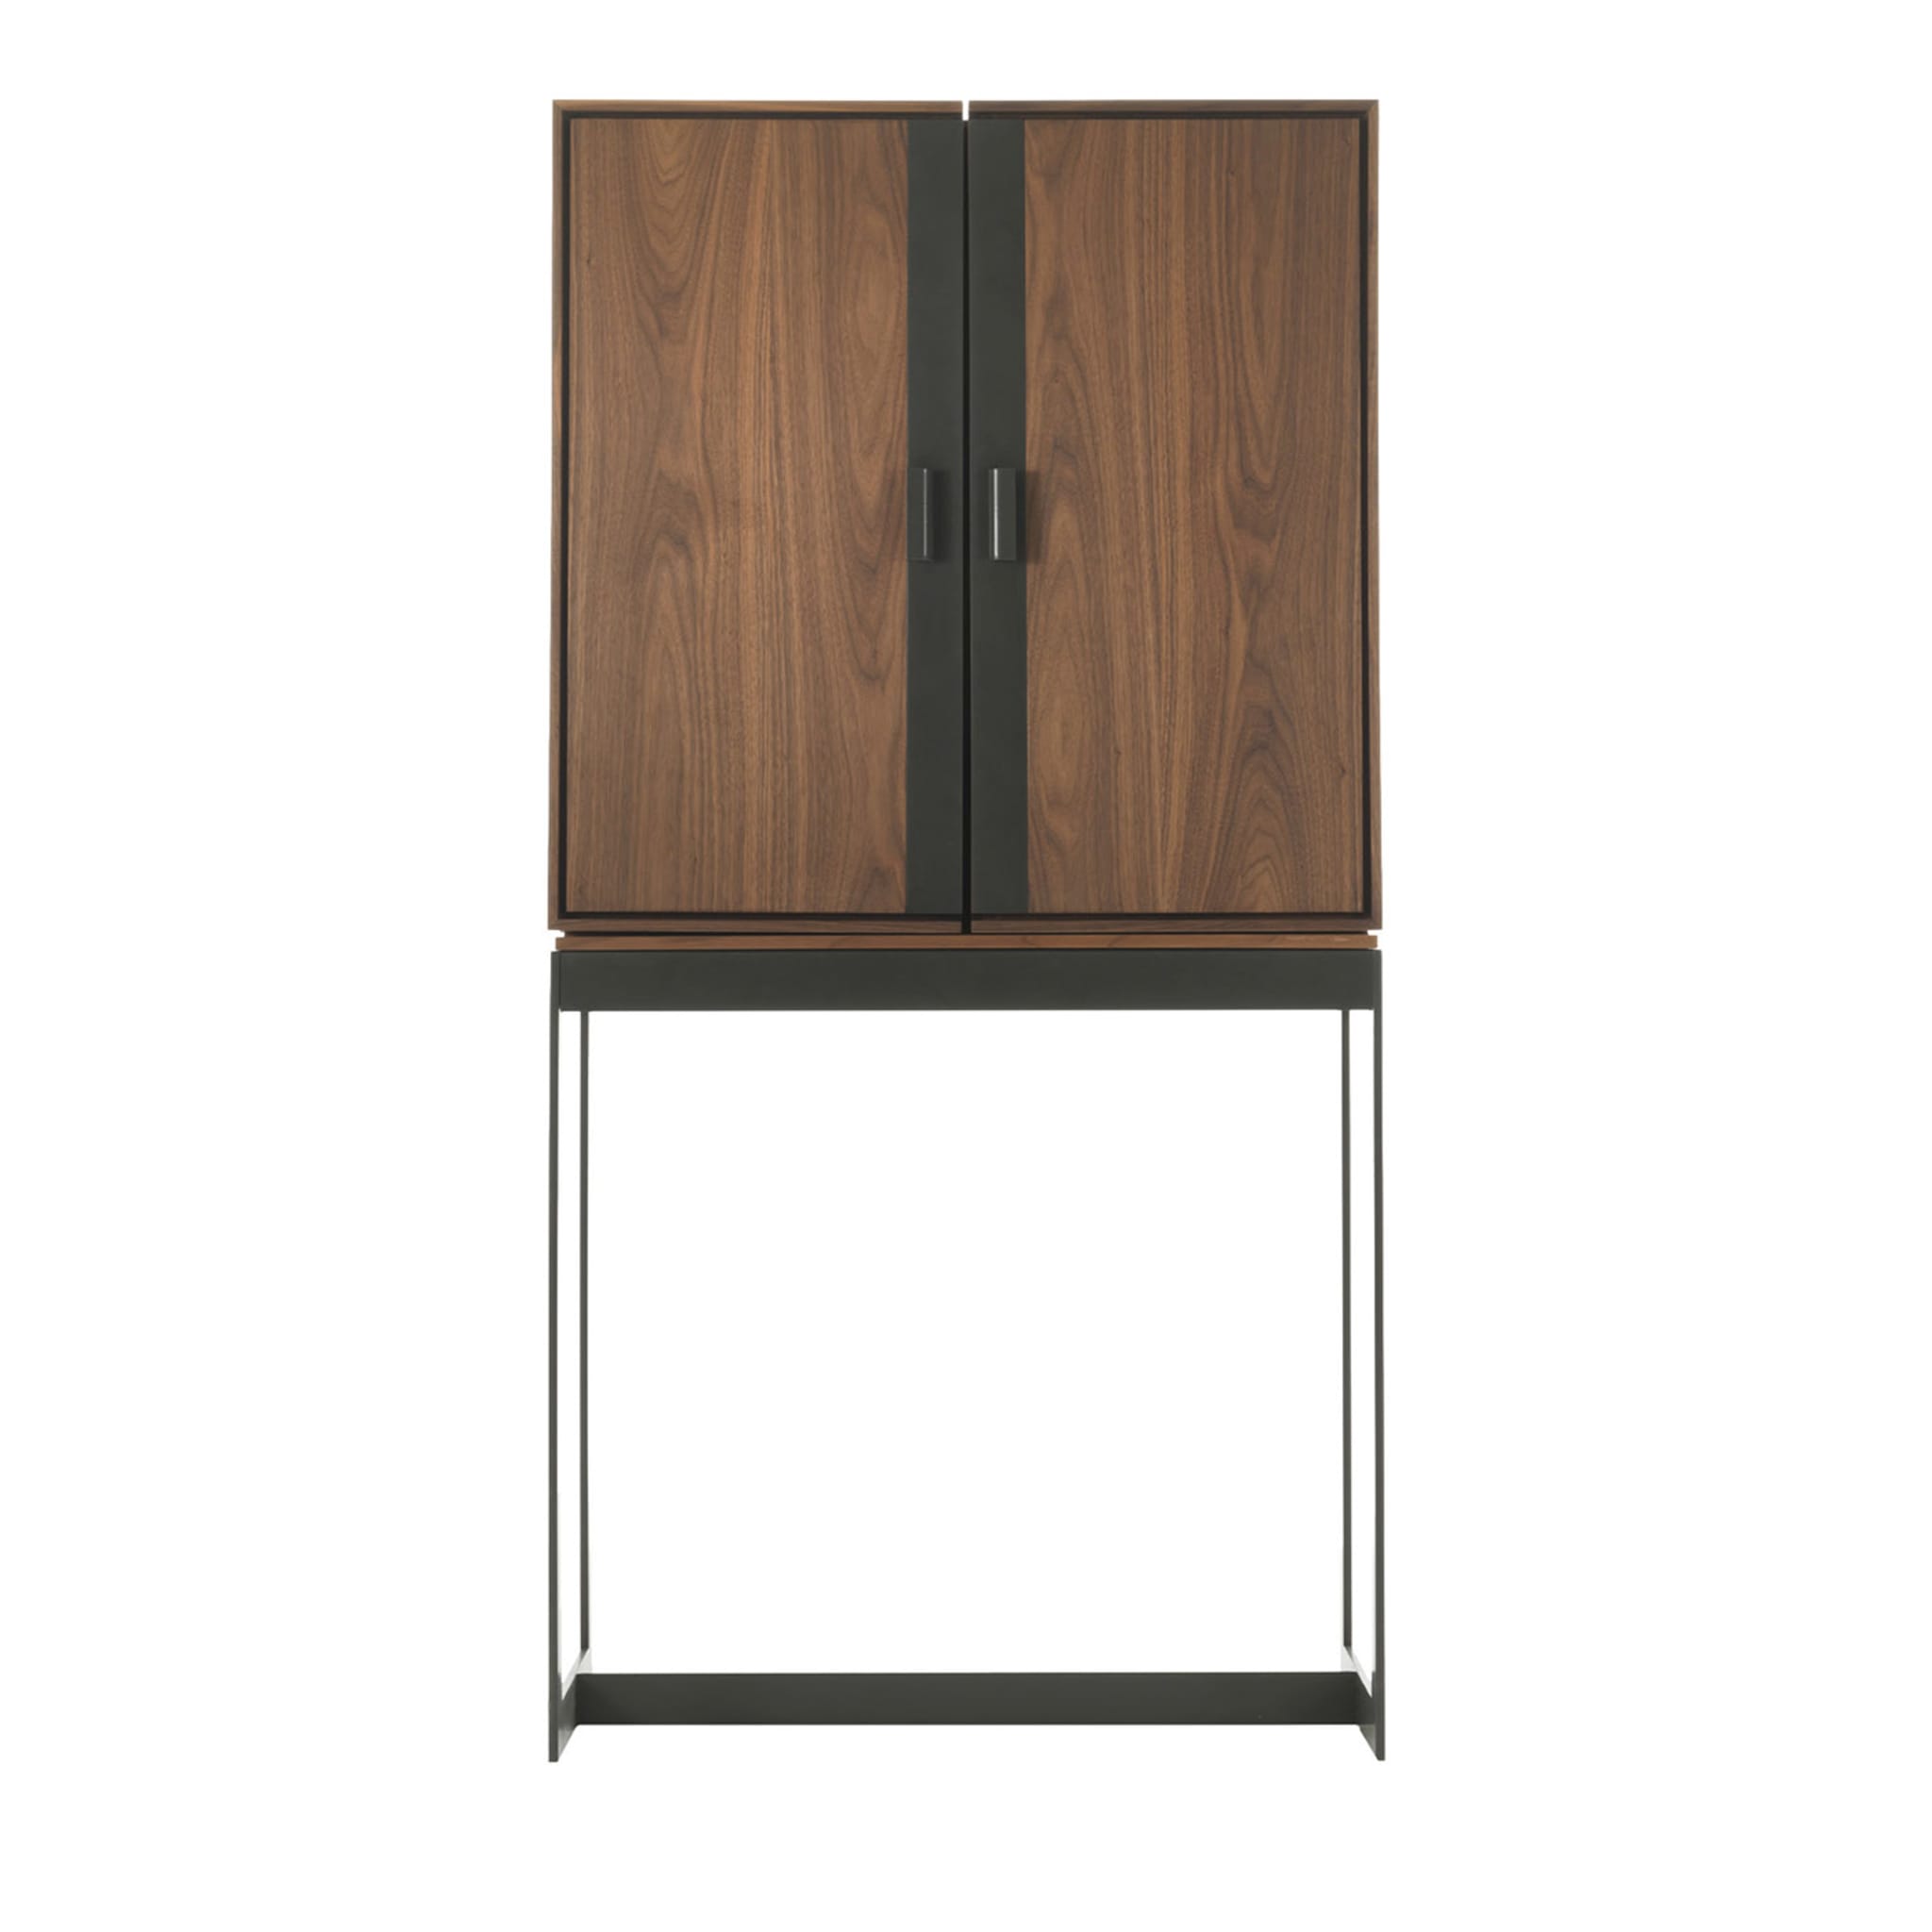 Cambusa Fly Reserve Cabinet by Giuliano & Gabriele Cappelletti - Main view